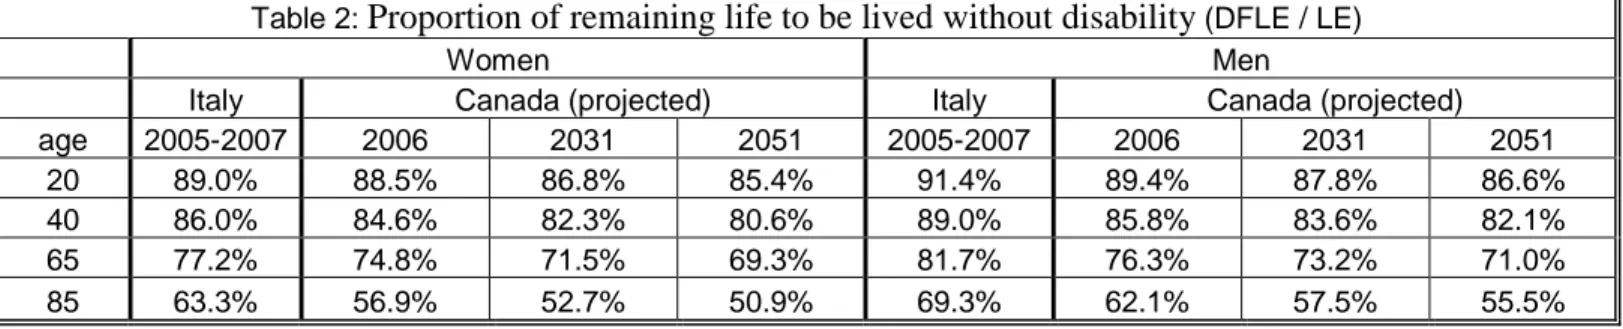 Table 2 shows the comparison of the ratios between DFLE and LE for Canada and Italy.  This ratio represents the proportion of remaining life to be lived without disability